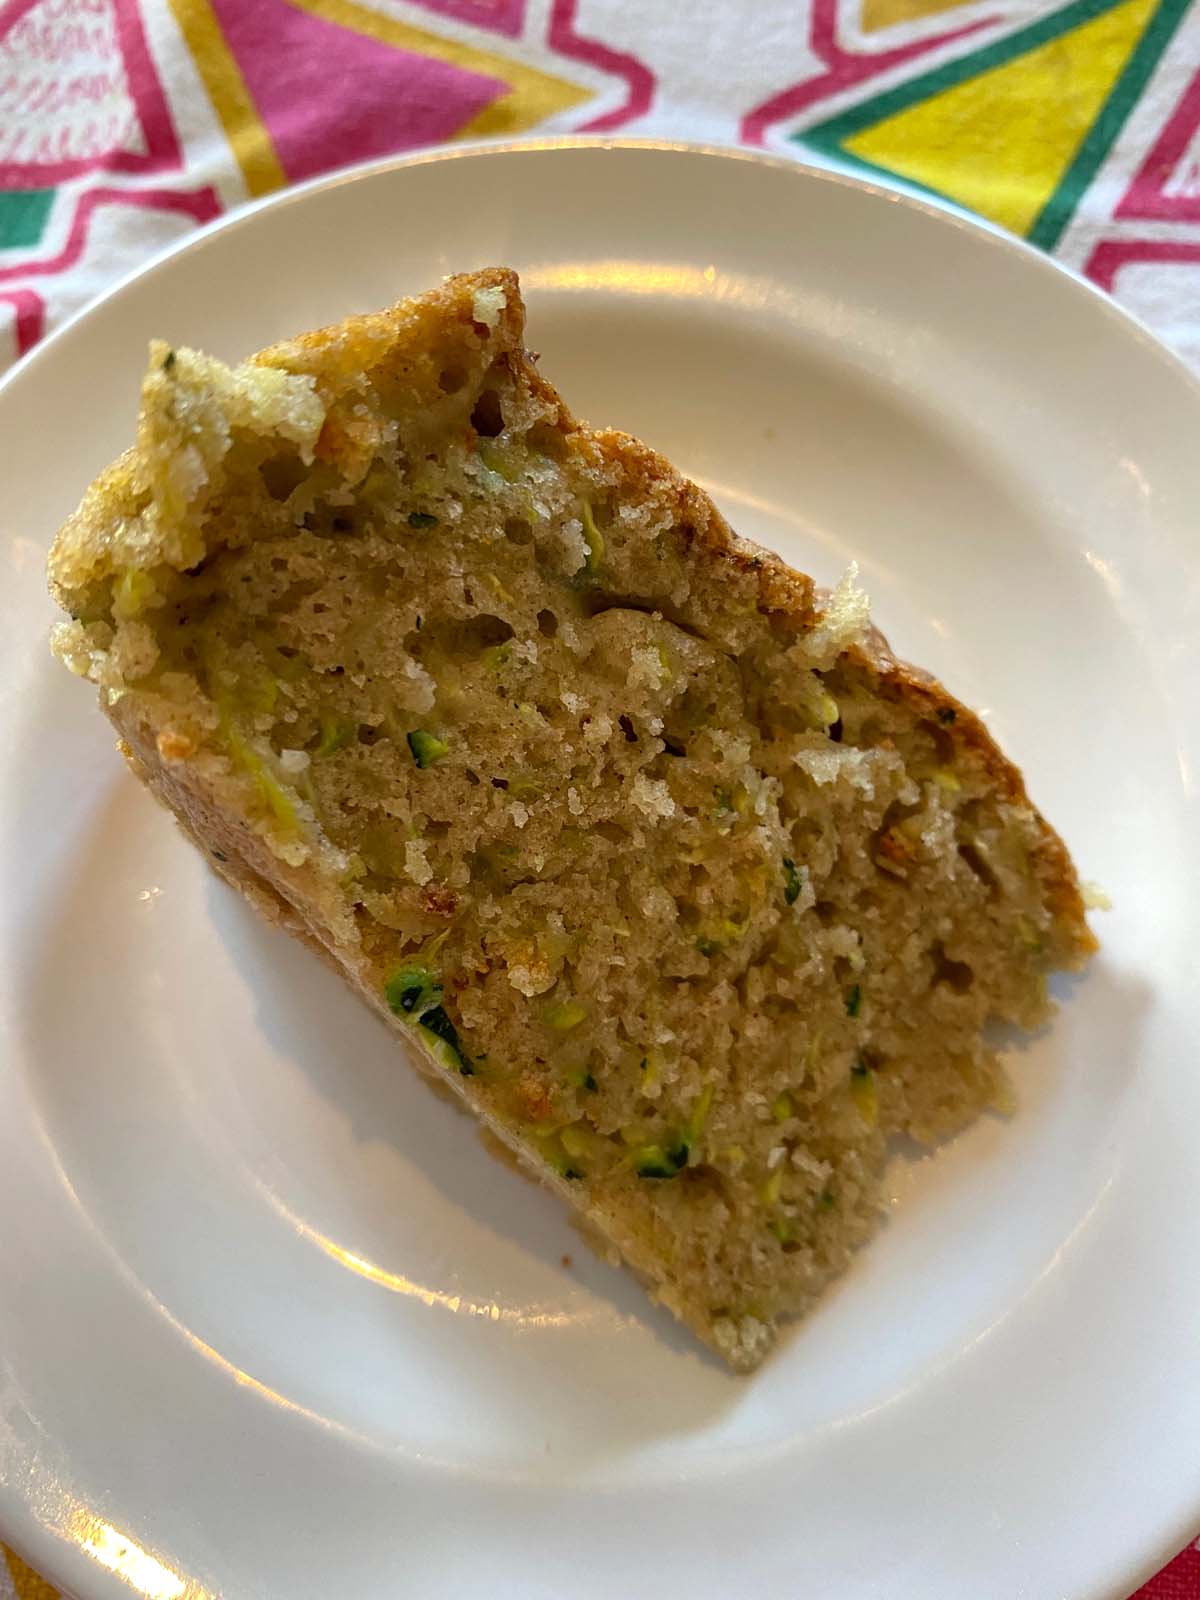 A slice of air fryer zucchini bread on a white plate.